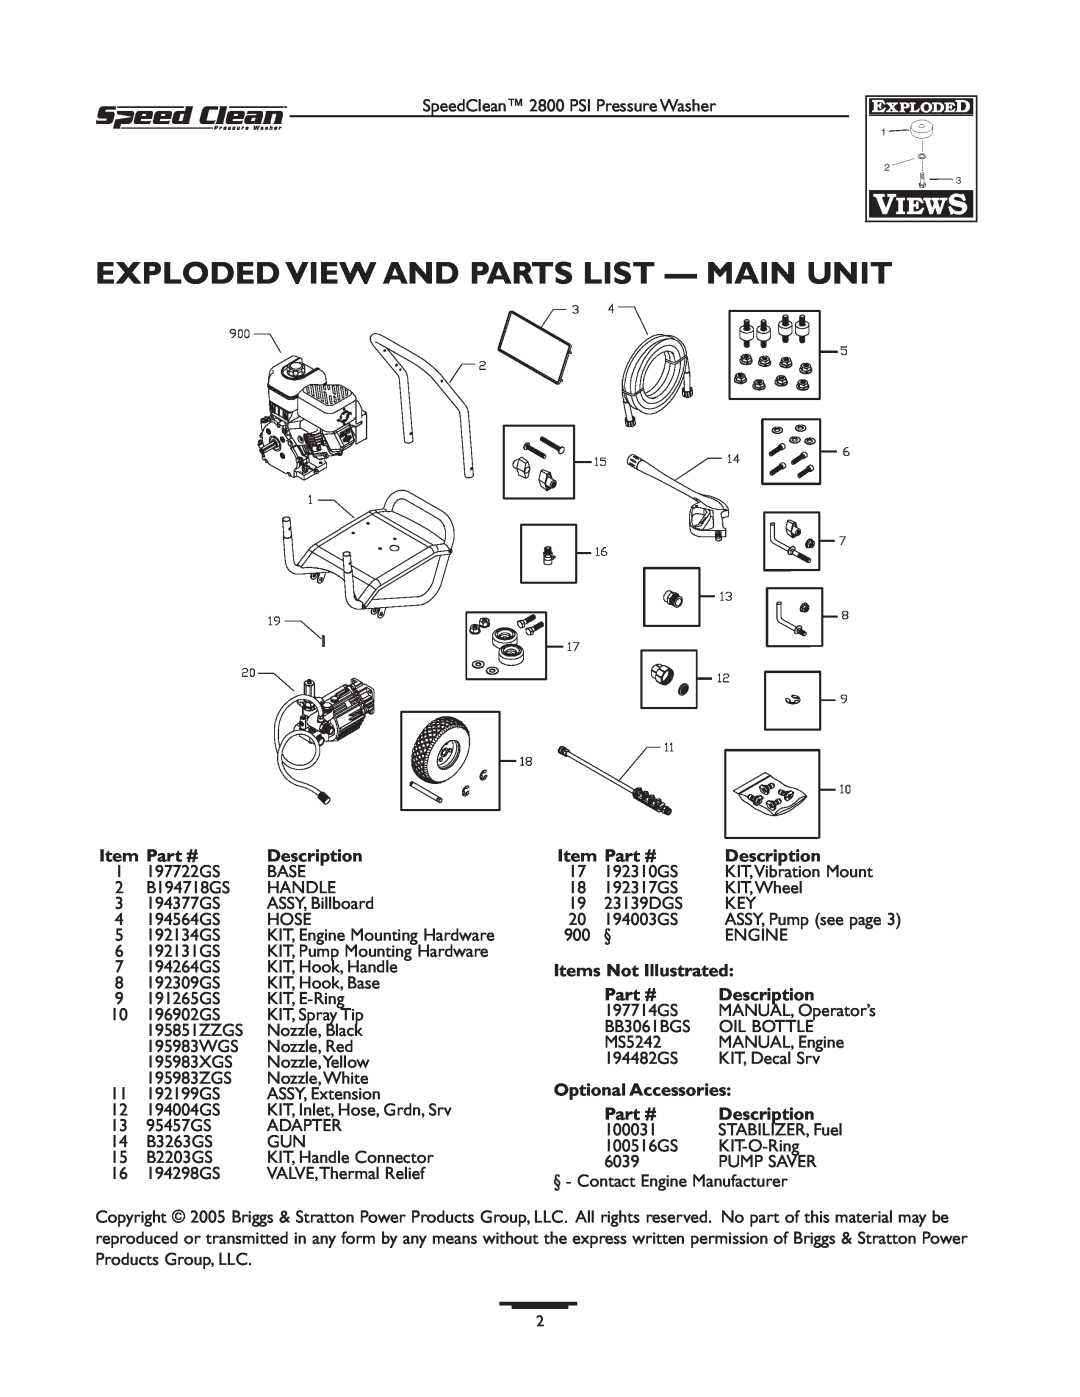 Briggs & Stratton 020212-1 manual Exploded View And Parts List - Main Unit 